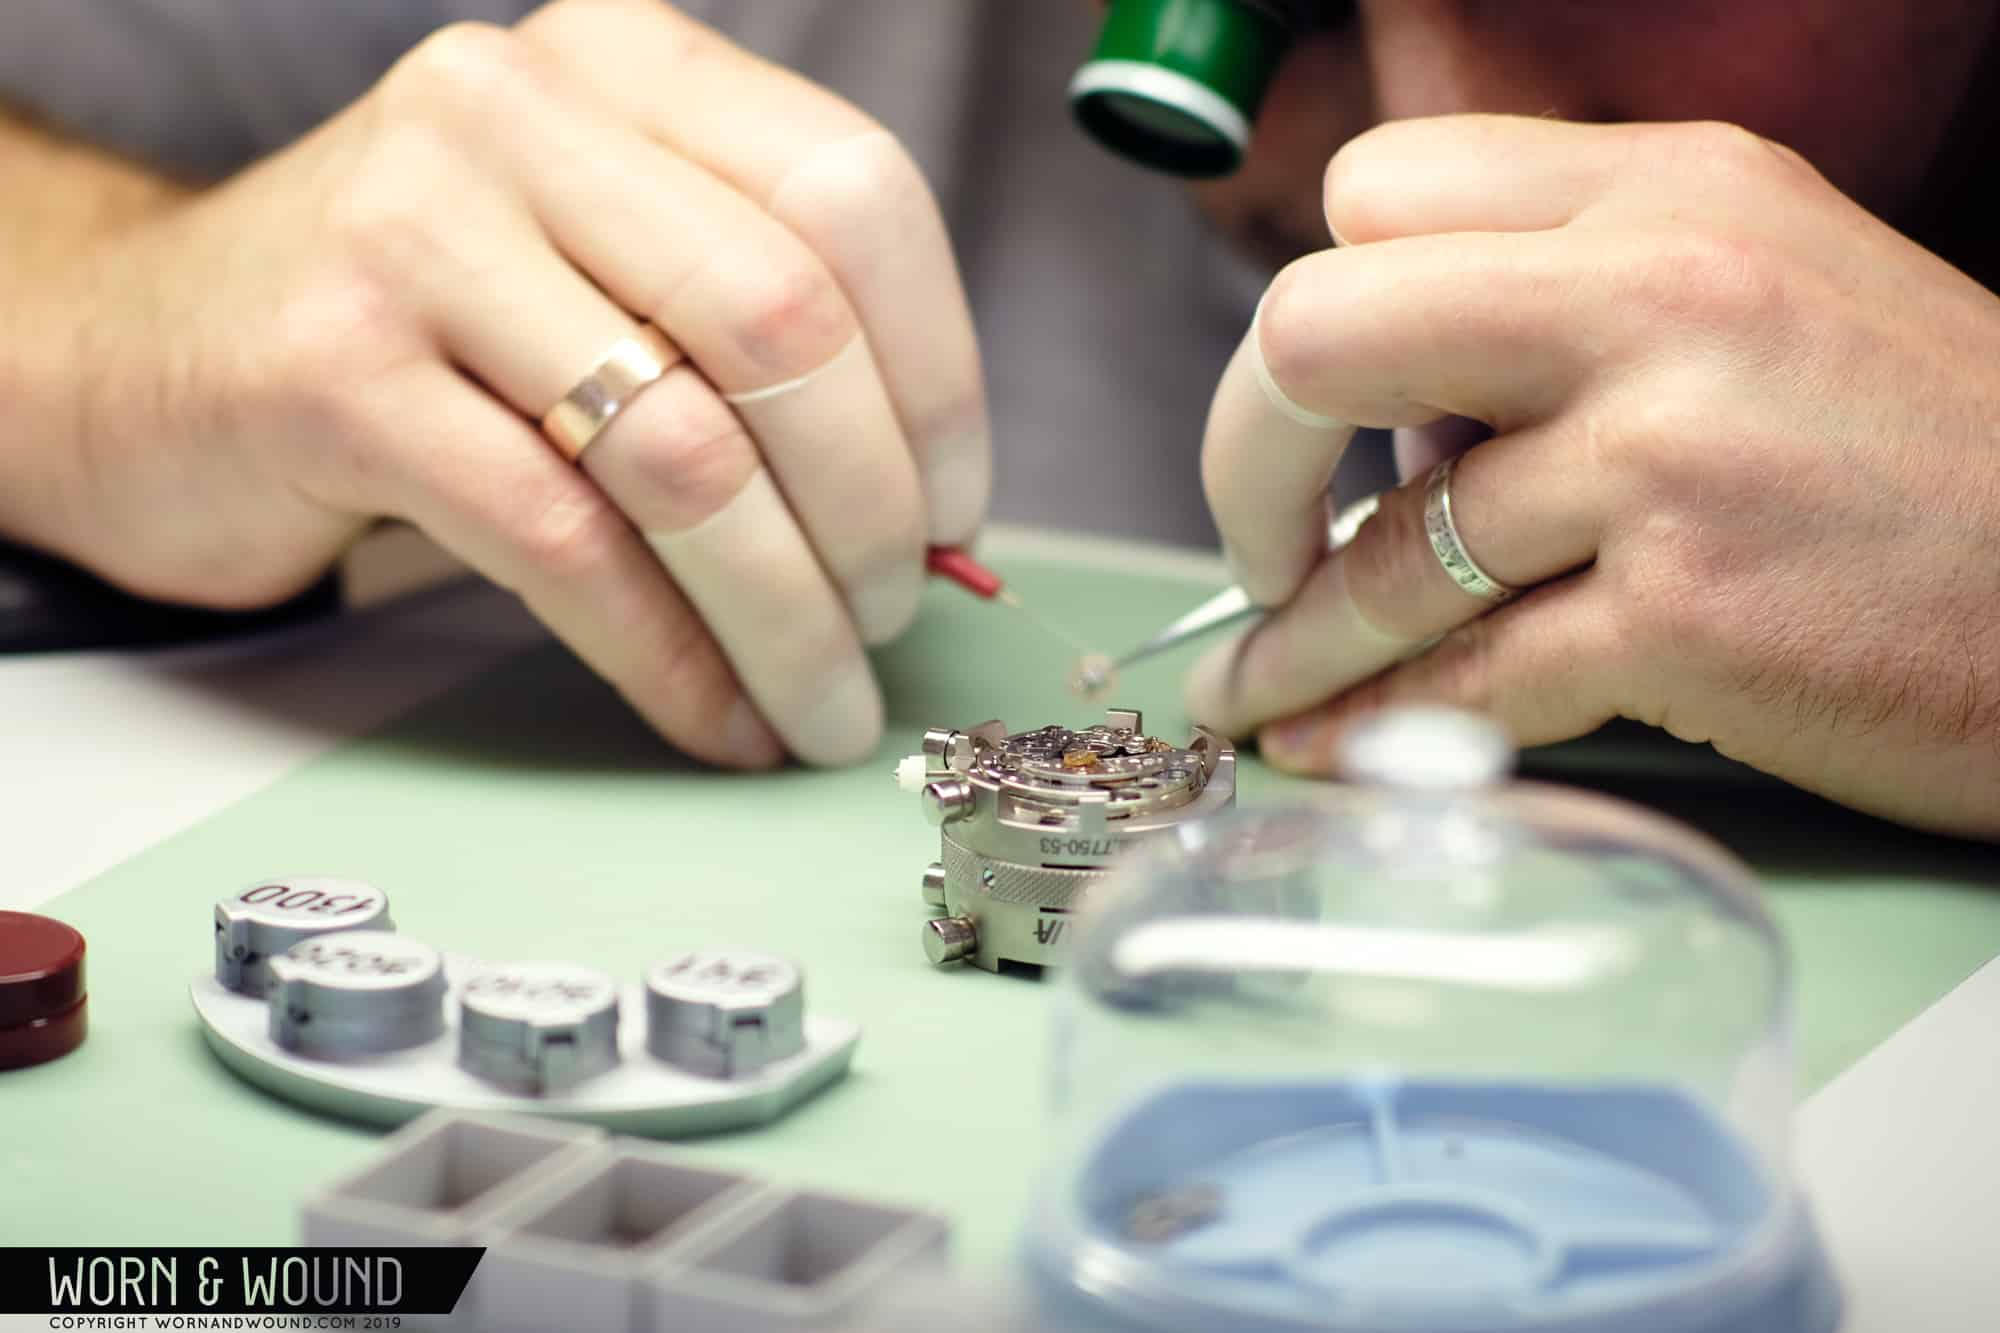 Damasko: A Look Inside the Manufacture – Part 2: The Movements